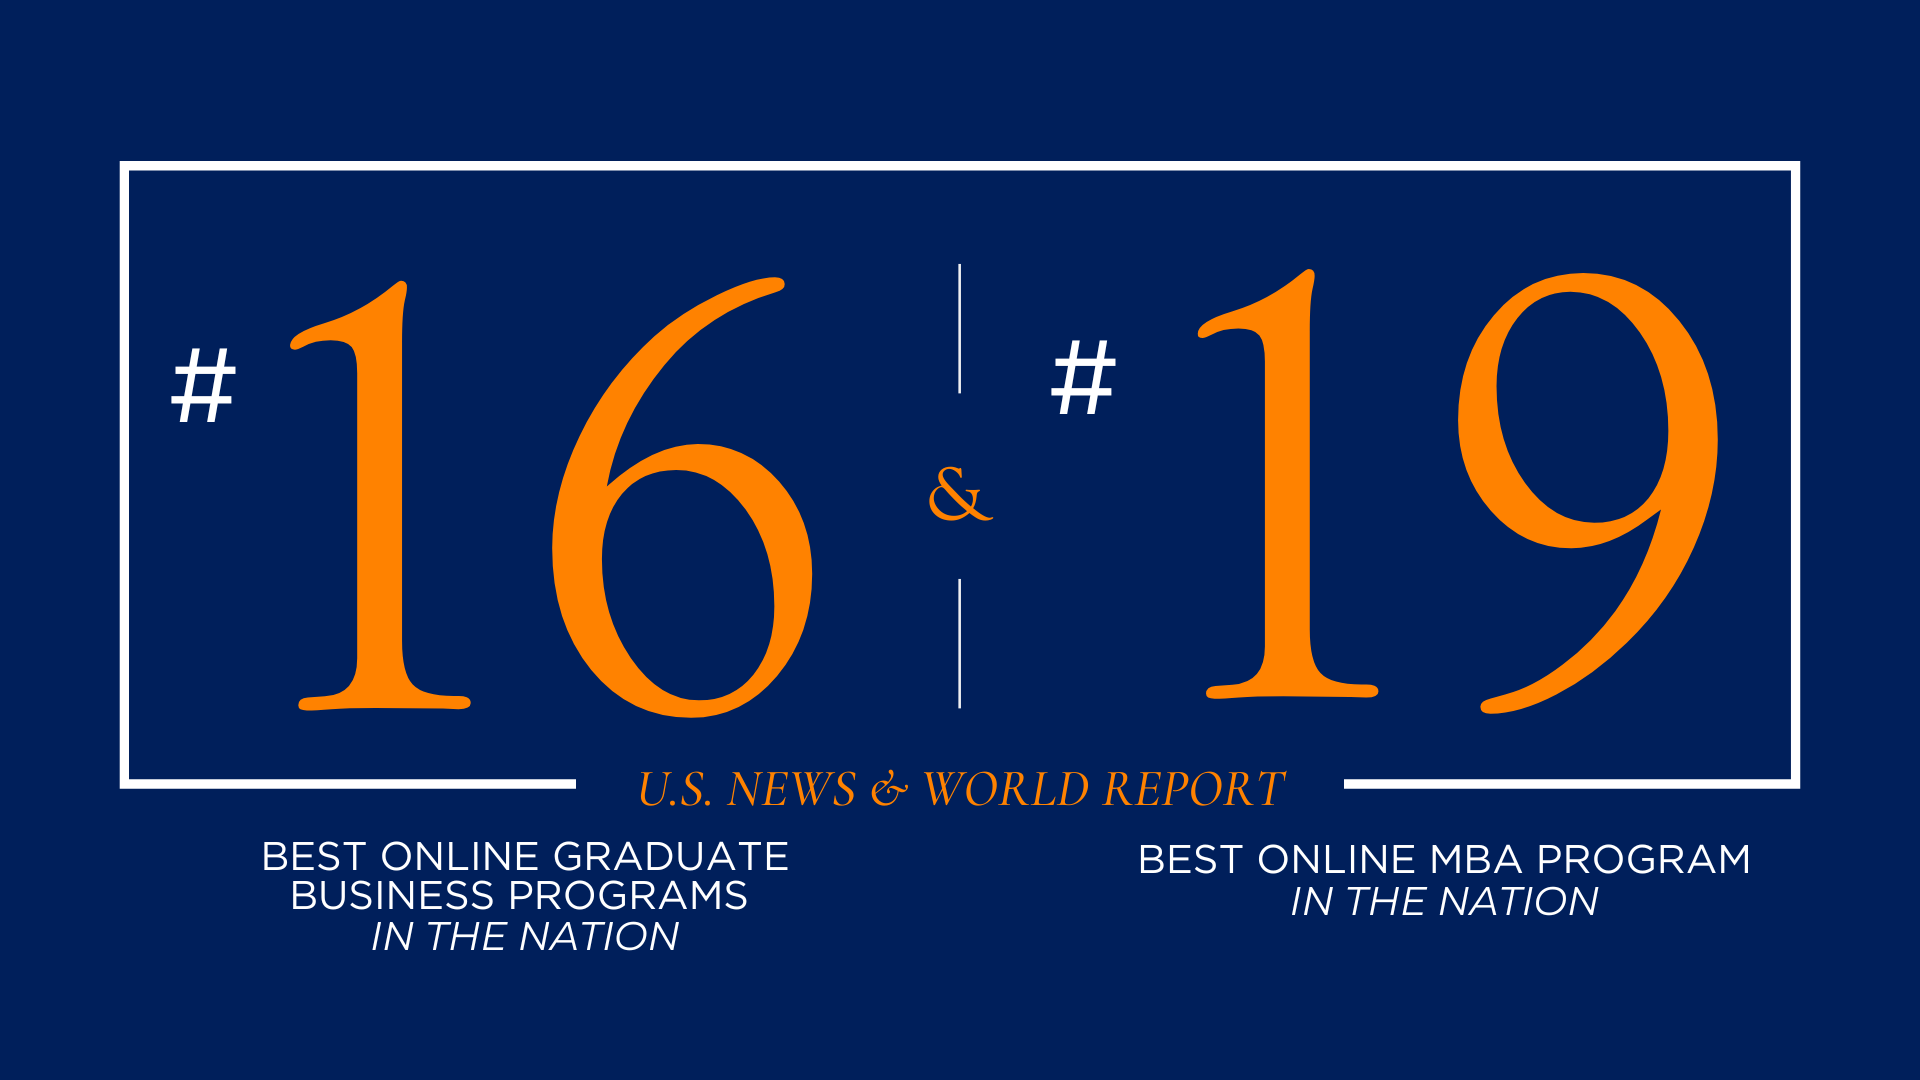 Graphic of U.S. News & World Report #16 Best Online Graduate Business Programs, and # 19 Best Online MBA rankings